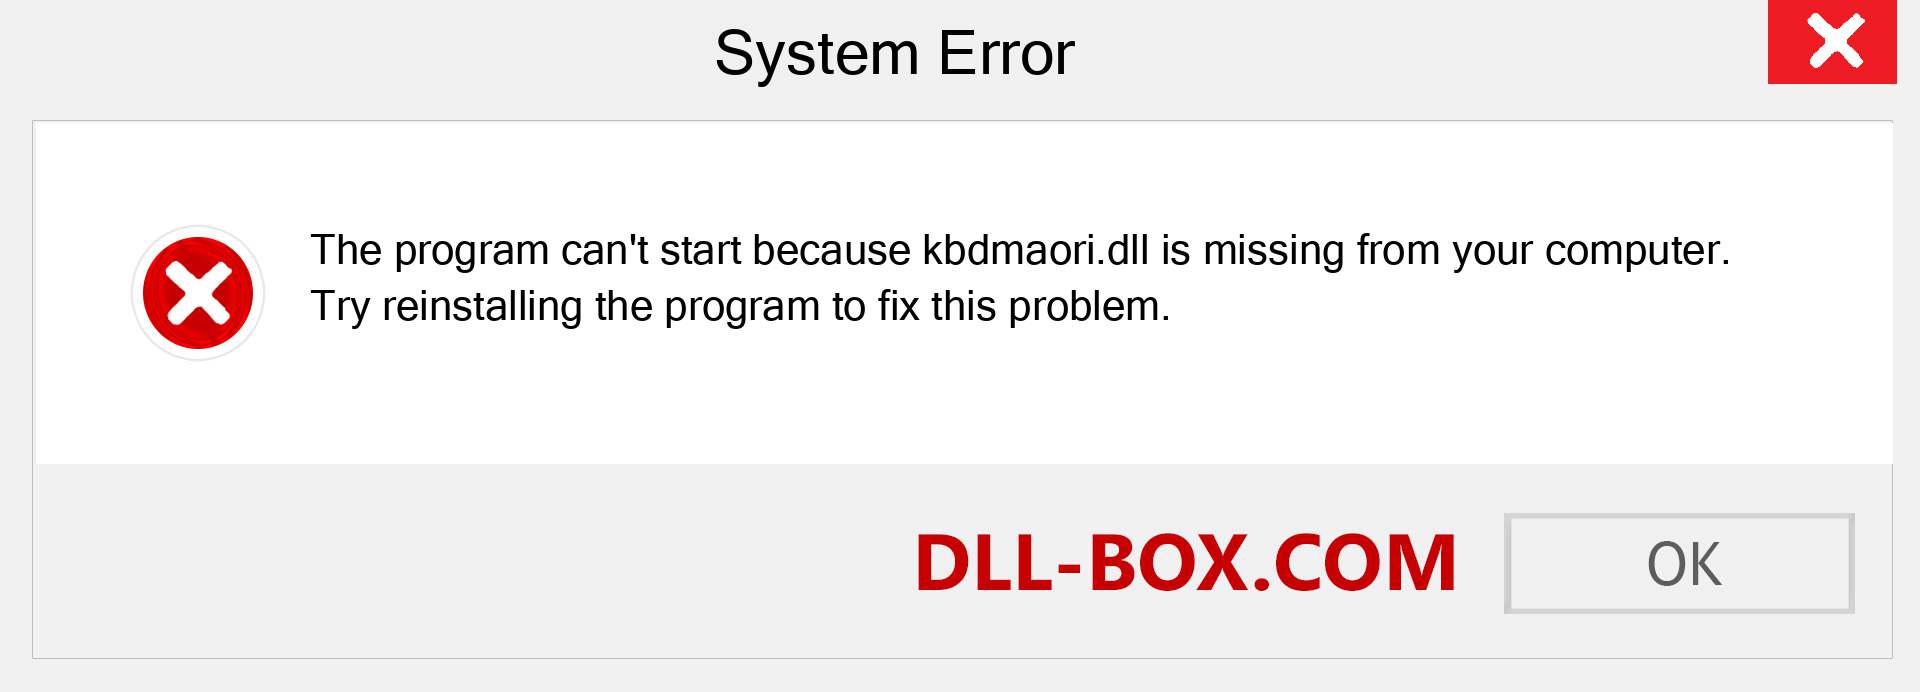  kbdmaori.dll file is missing?. Download for Windows 7, 8, 10 - Fix  kbdmaori dll Missing Error on Windows, photos, images